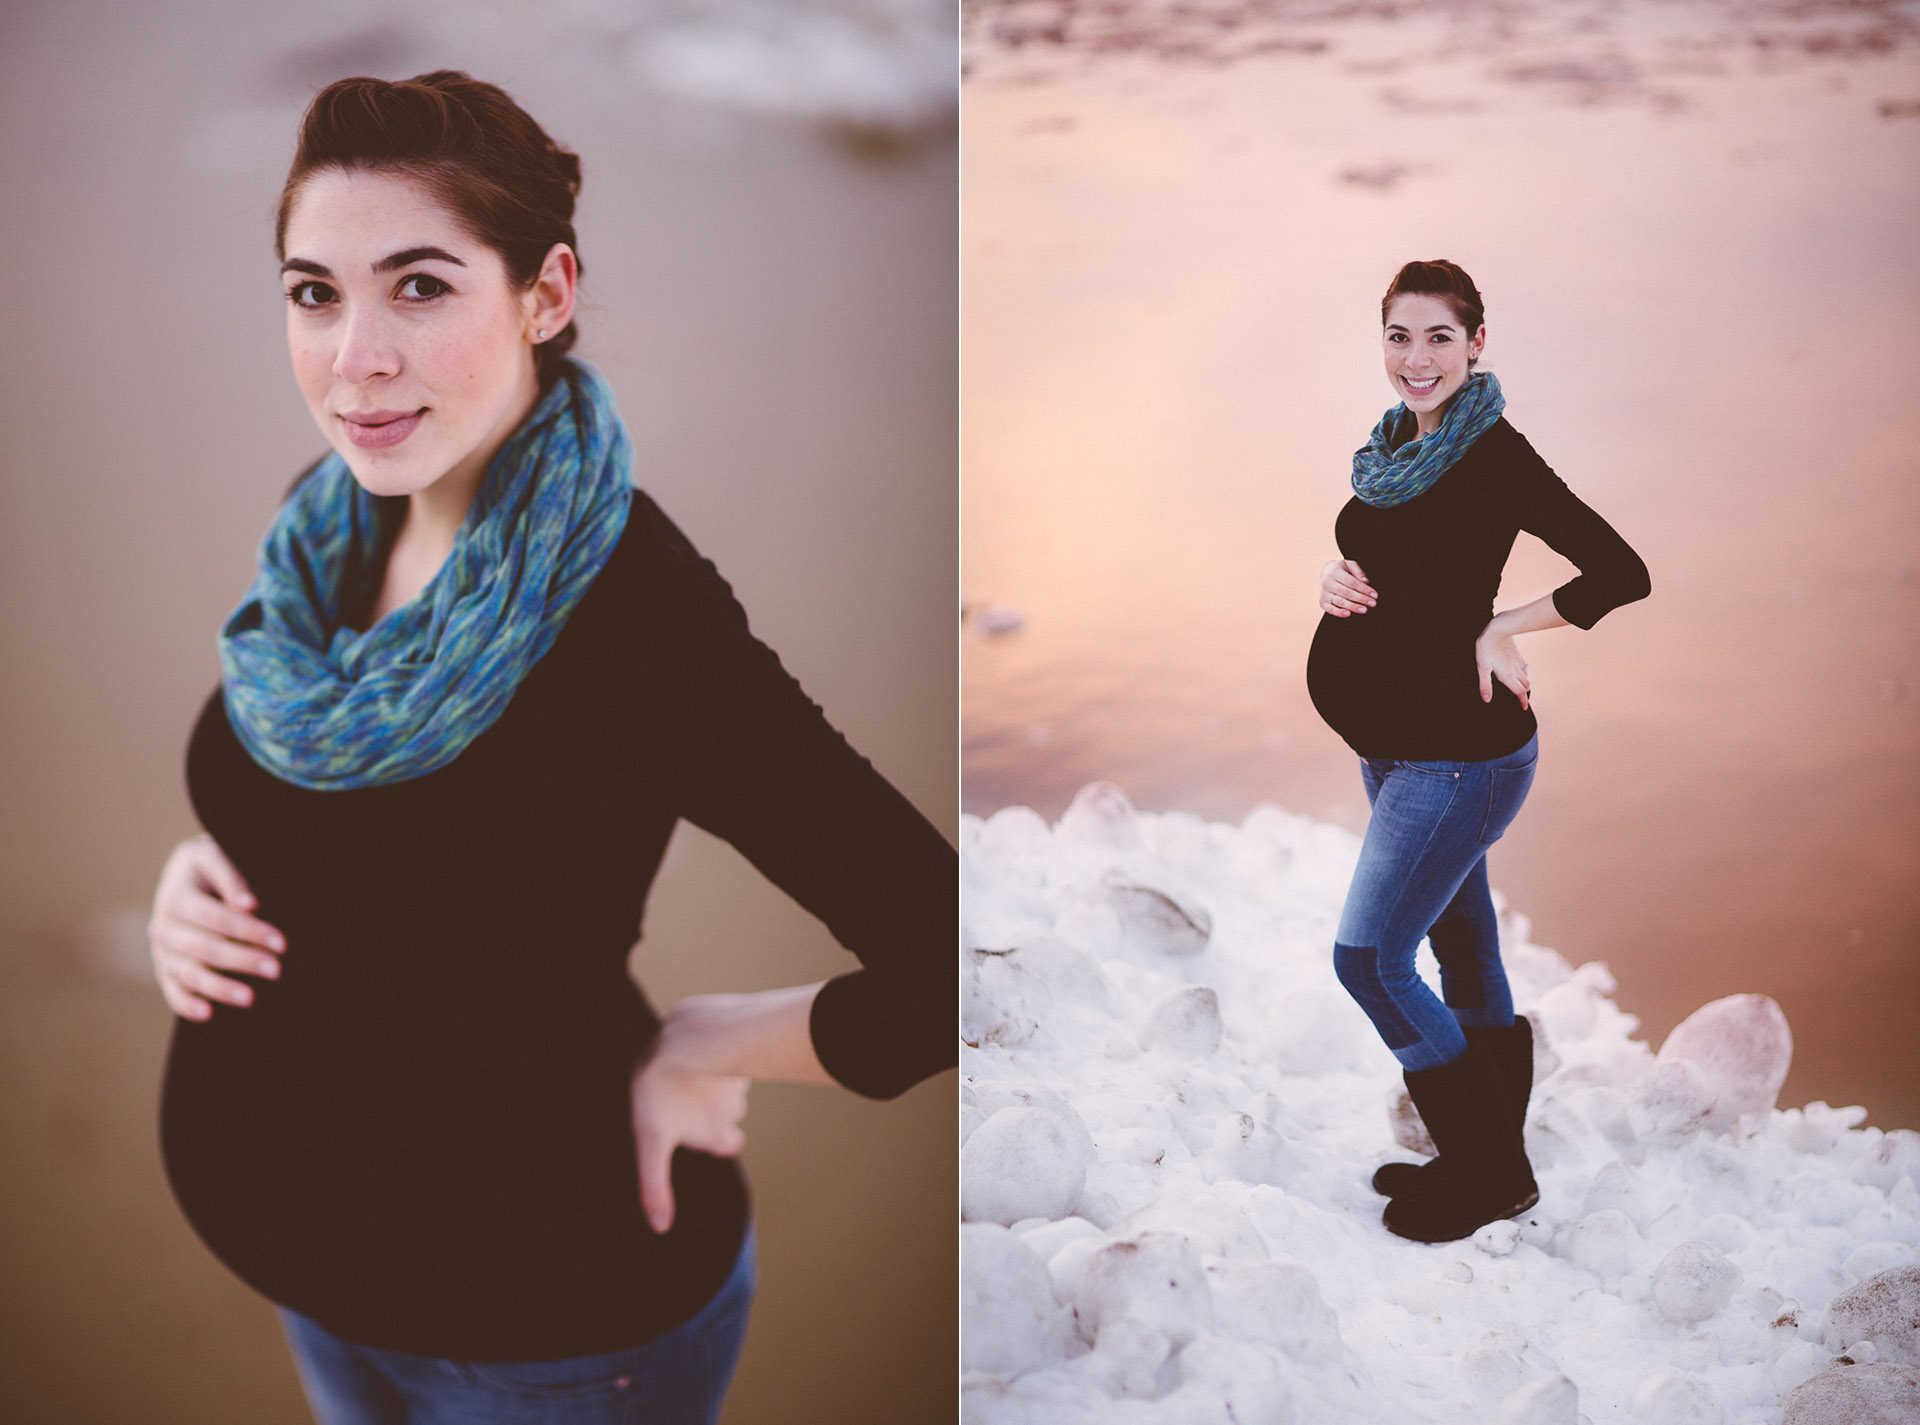 Angela Clunk Maternity Photos During Pregnancy - too much awesomeness photography - image 37.jpg